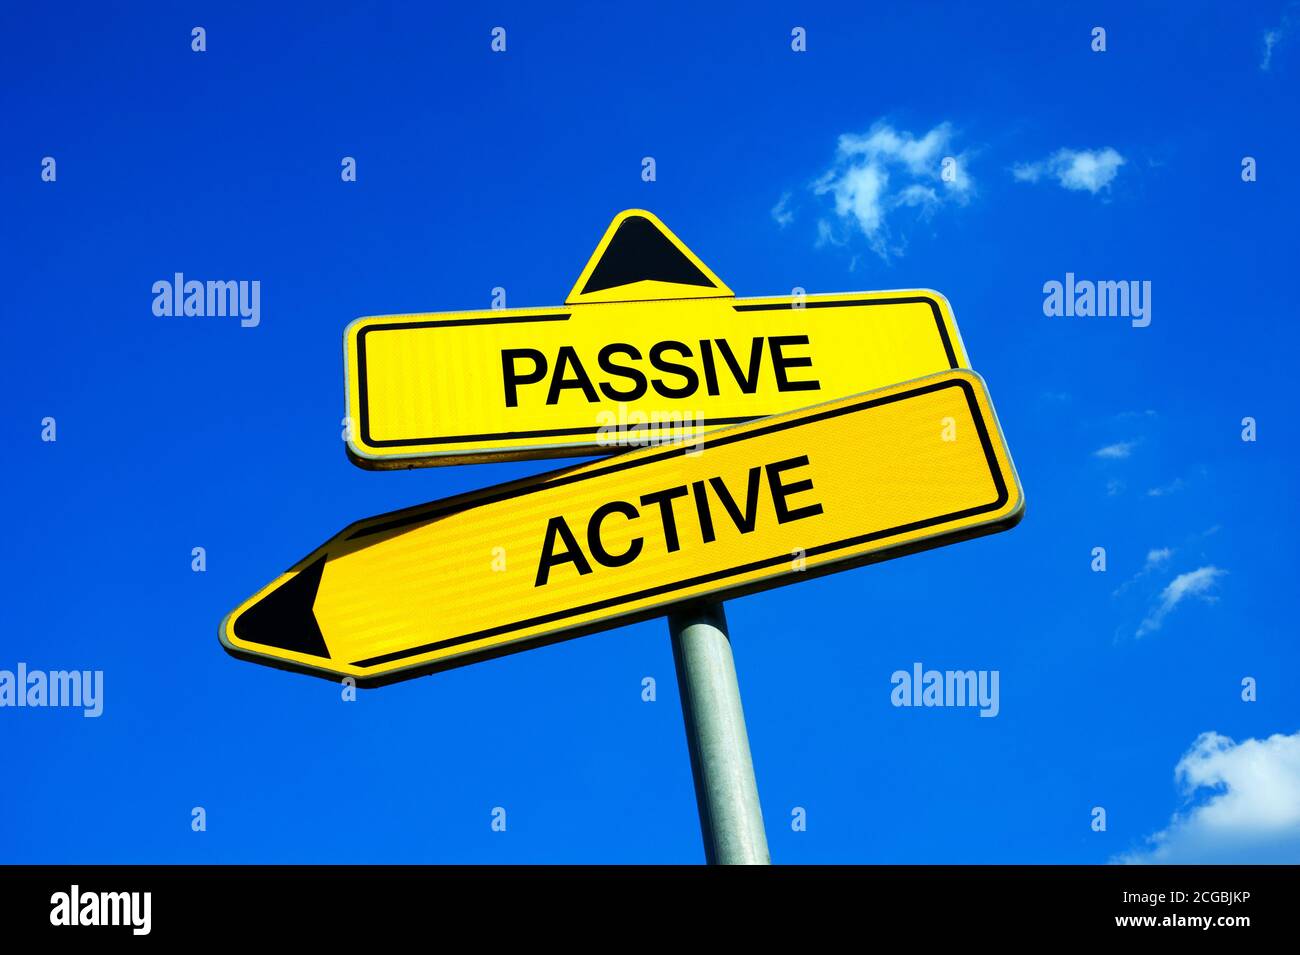 Passive or Active - Traffic sign with two options - behavior, attitude, approach and dynamics during leisure time. Engagement, involvement and enthusi Stock Photo